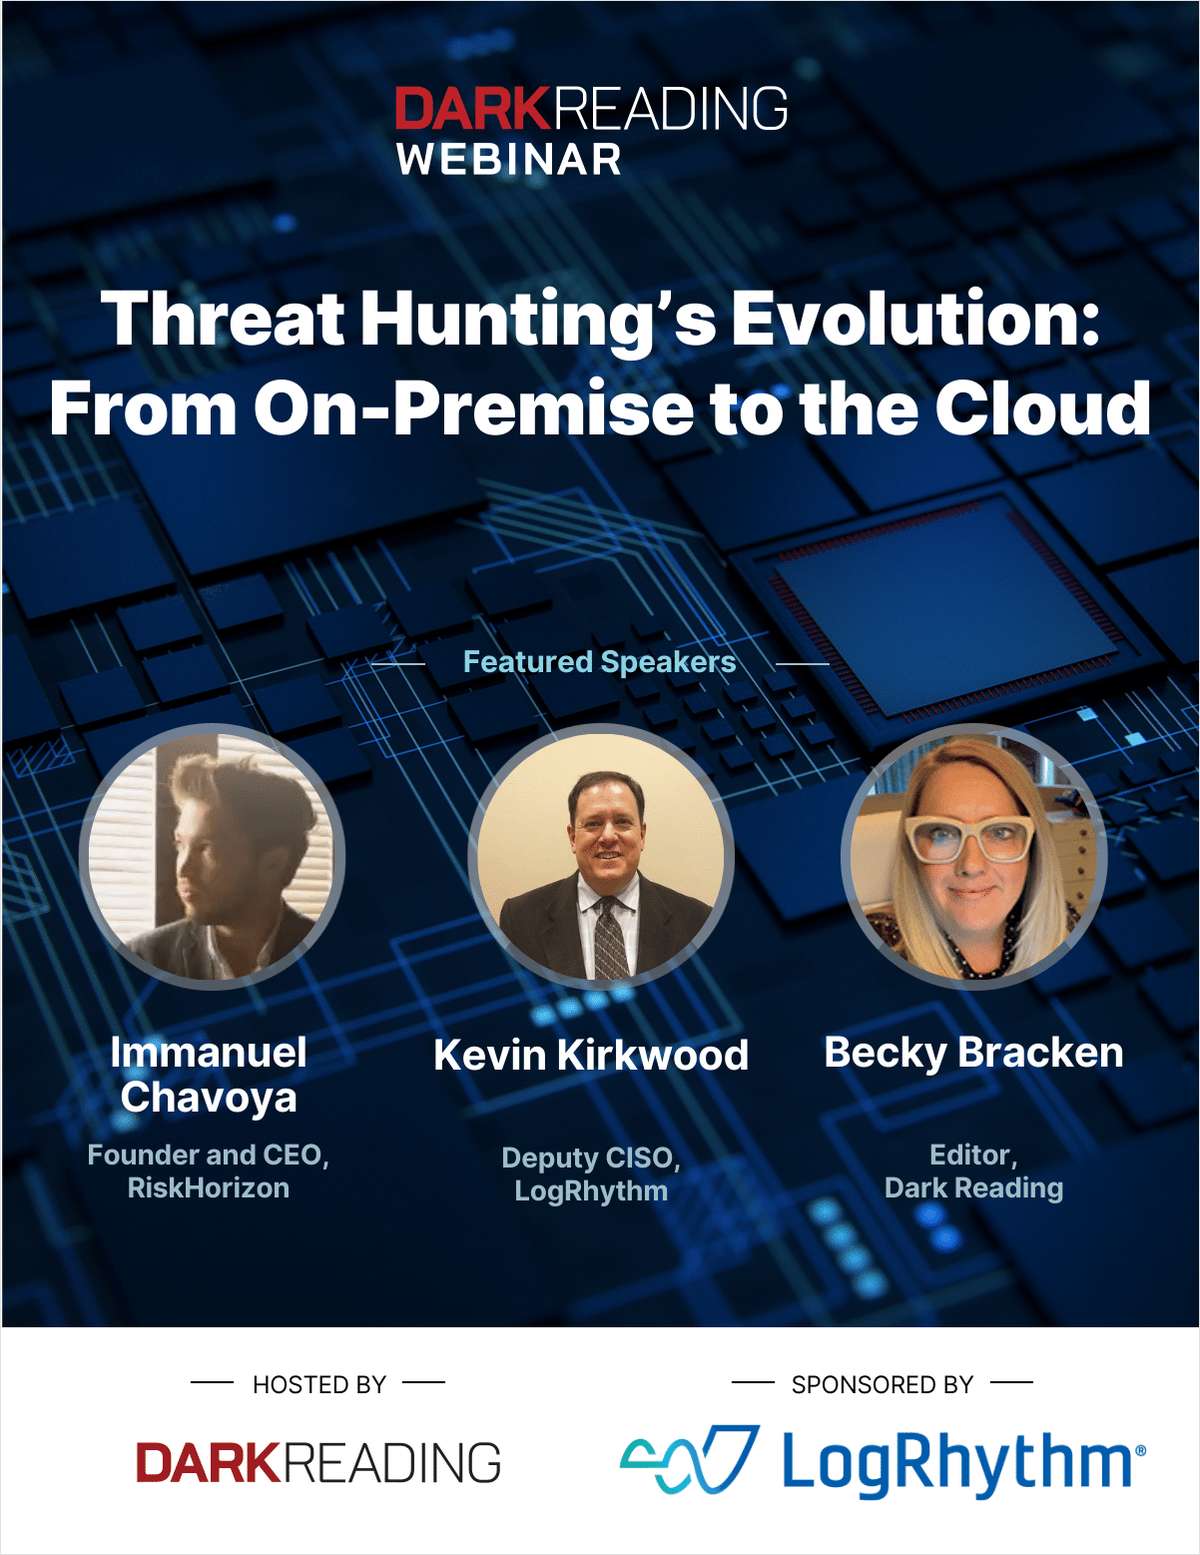 Threat Hunting's Evolution: From On-Premise to the Cloud